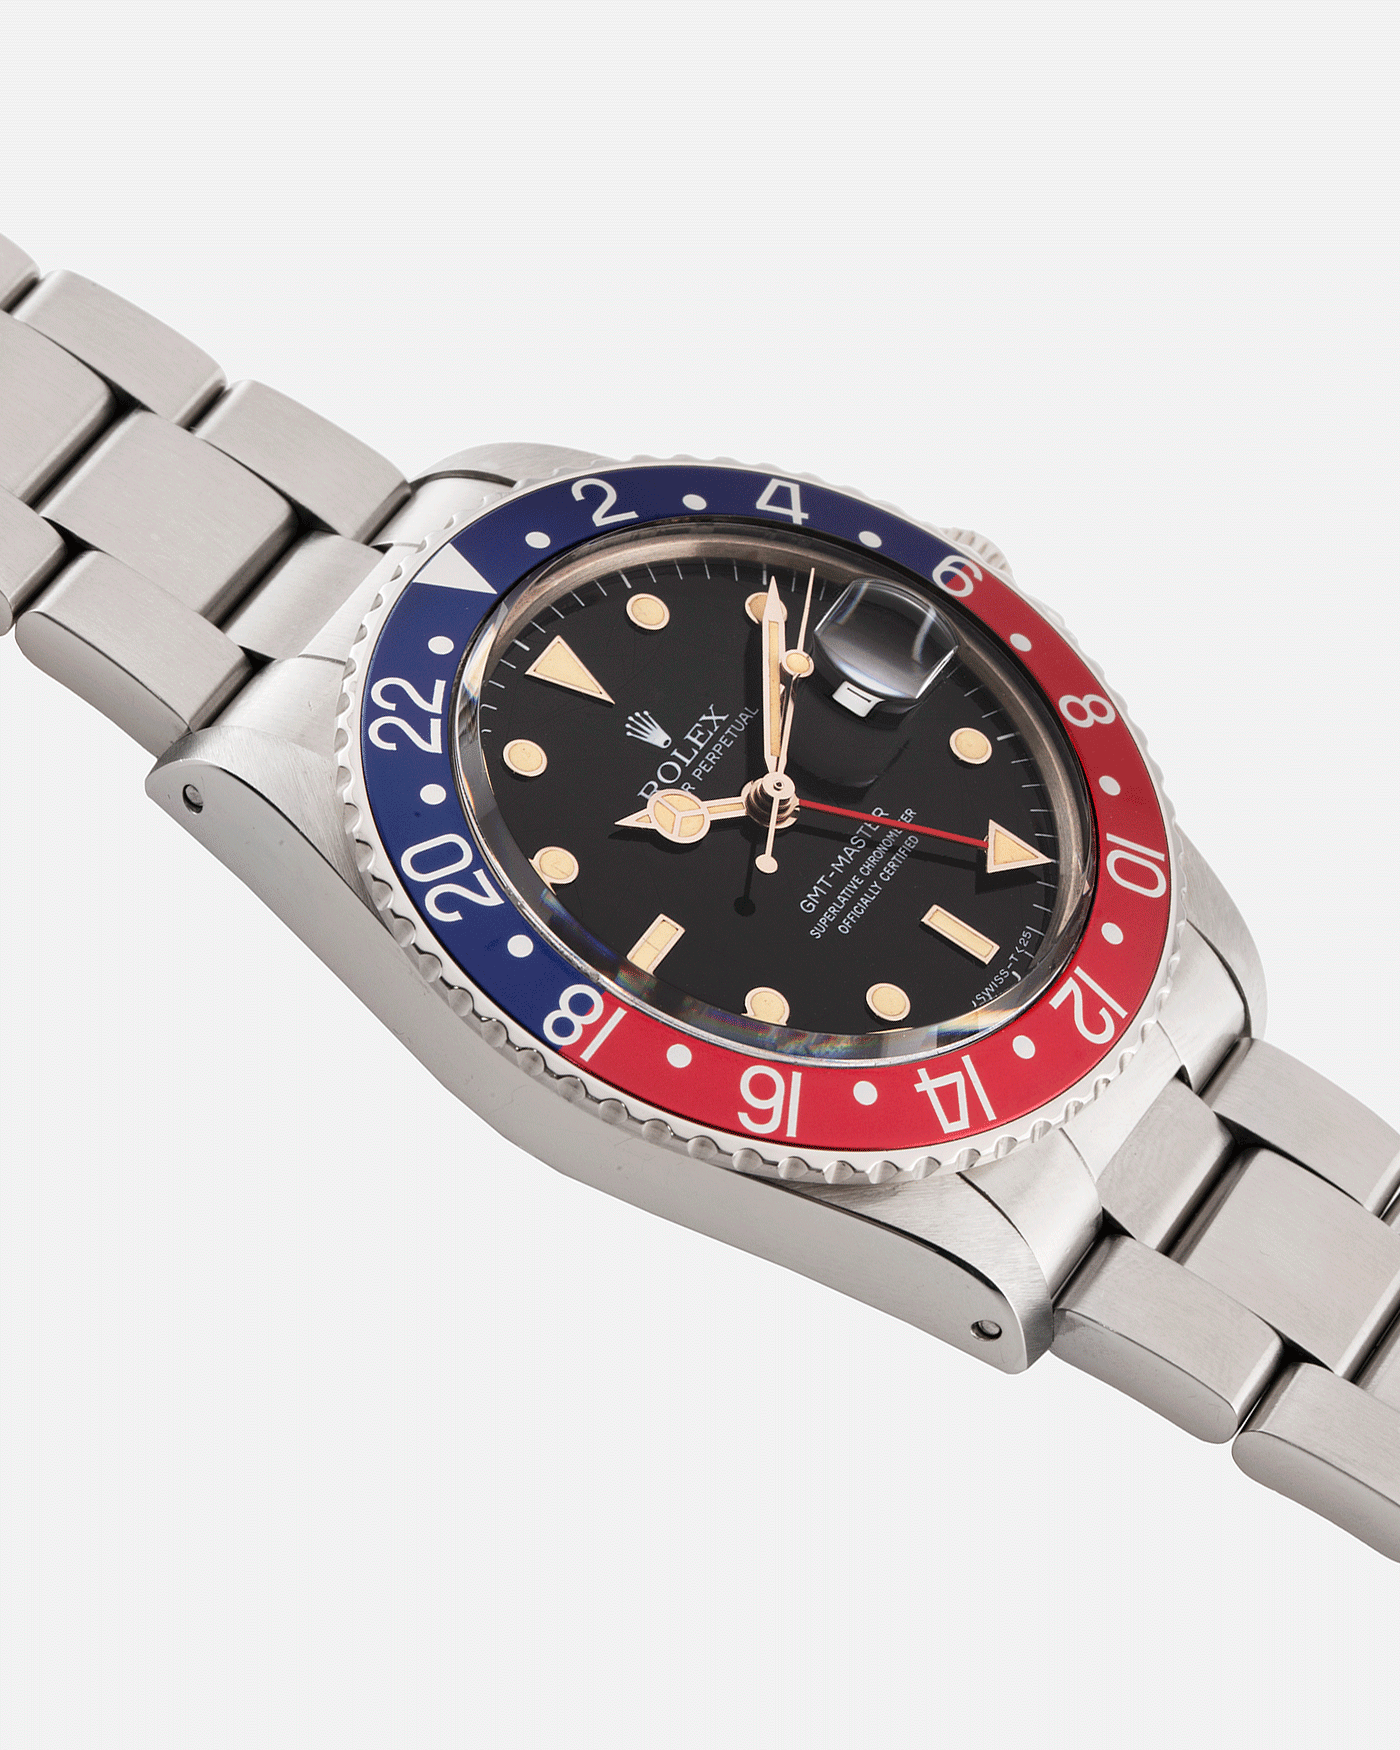 Brand: Rolex Year: 1985 Model: GMT-Master Reference Number: 16750 Gloss Dial Serial Number: 8,71X,XXX Material: Stainless Steel Movement: Cal. 3075 Case Diameter: 40mm Lug Width: 20mm Bracelet: 78360 with 501B end links 